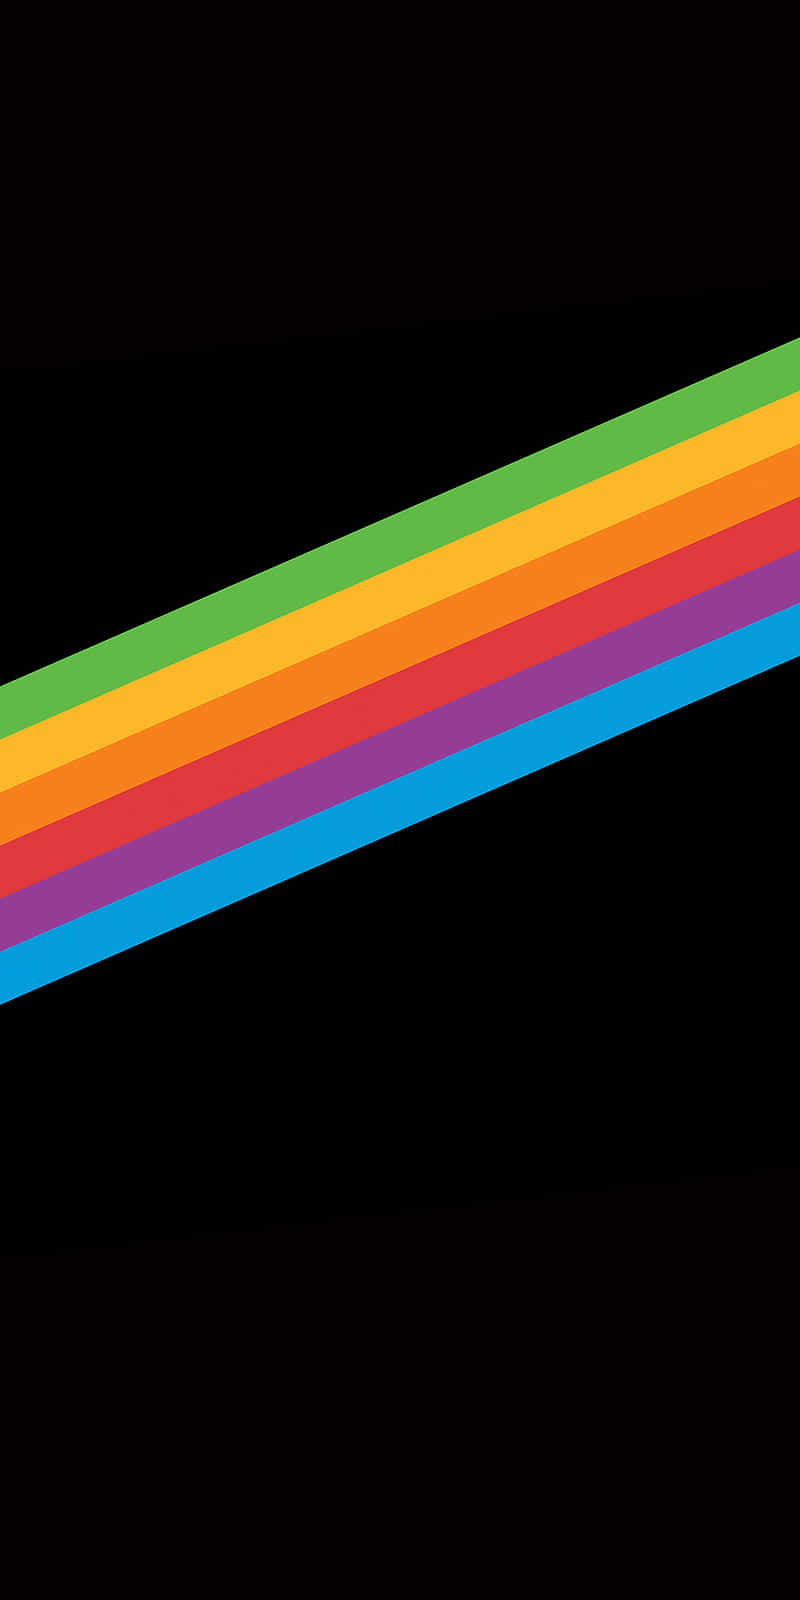 The Dark Side Of The Moon - A Rainbow Colored Stripe Wallpaper